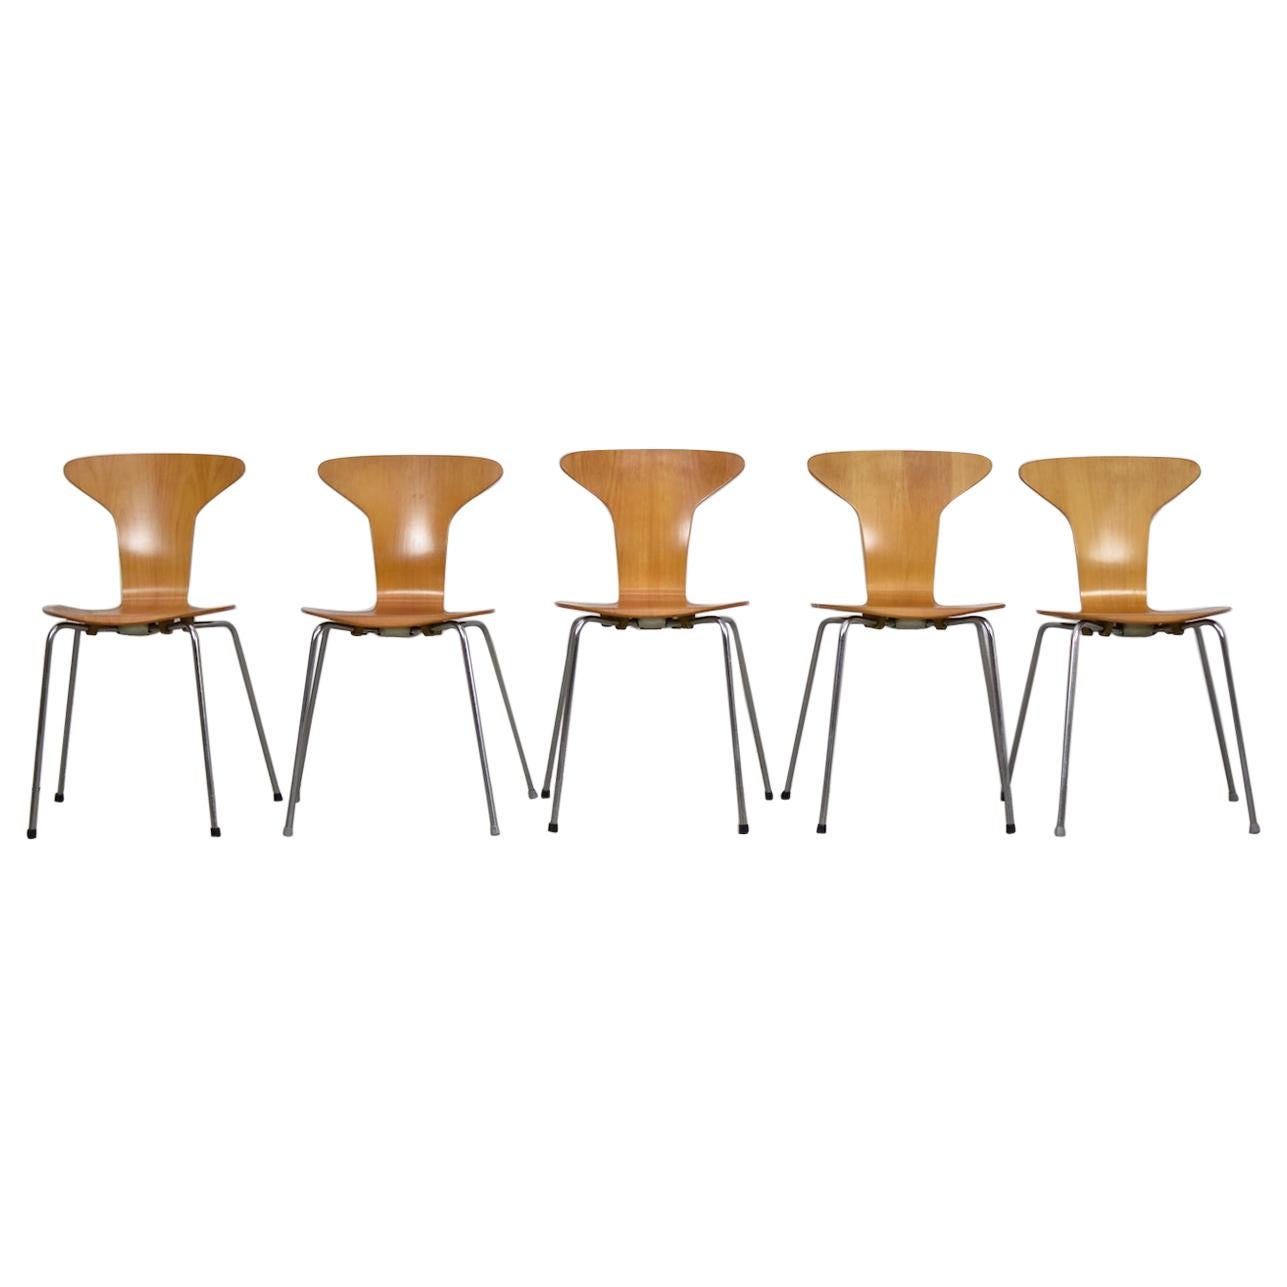 Set of 5 ‘Mosquito’ Dining Chairs by A. Jacobsen for Fritz Hansen, Denmark 1950s